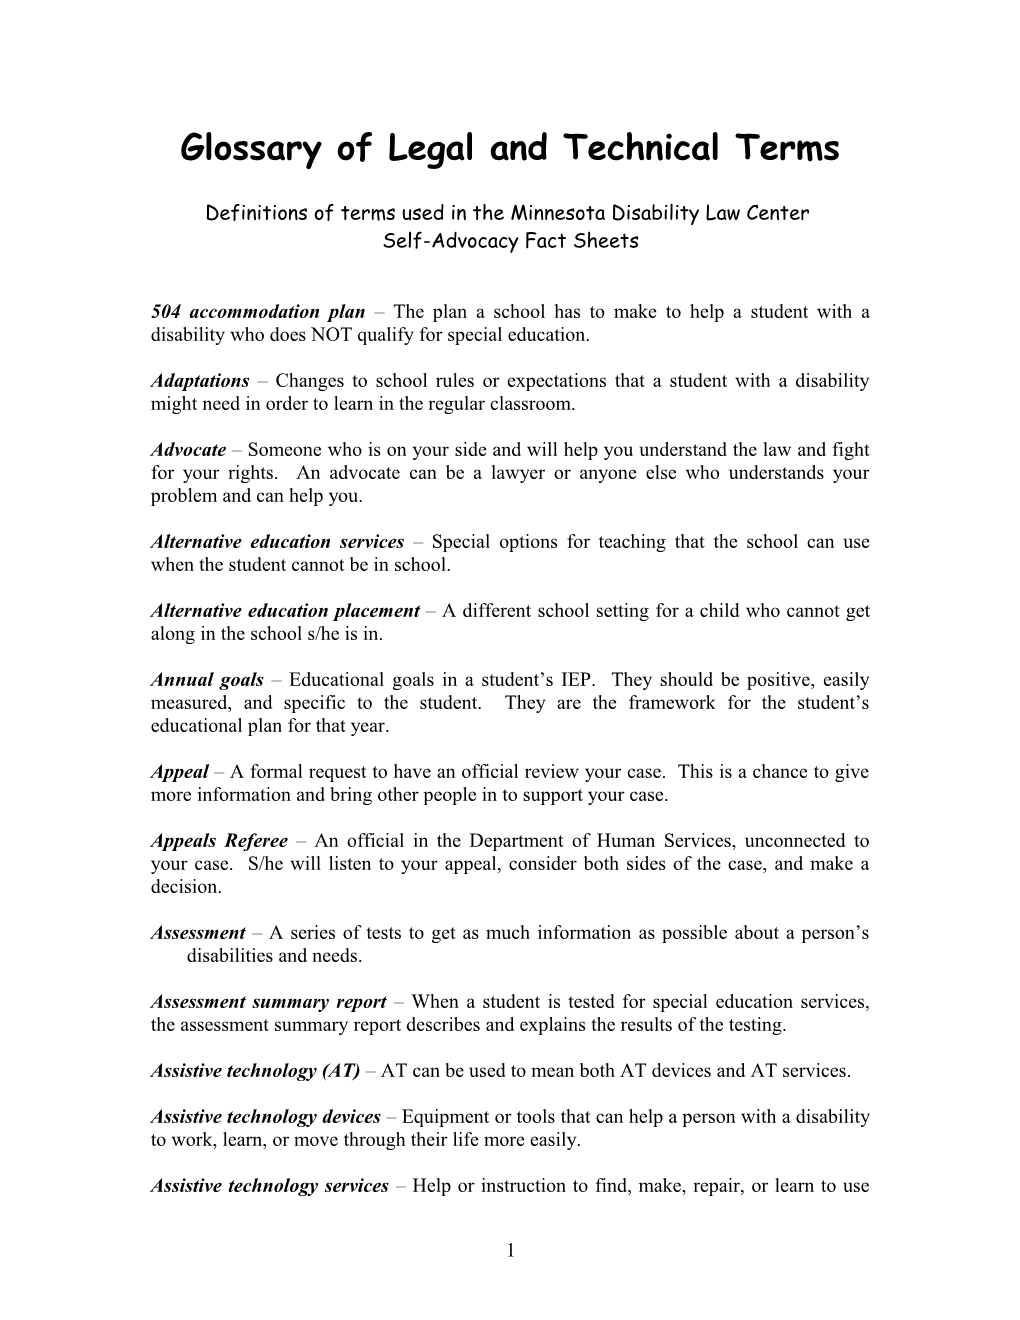 Glossary of Legal and Technical Terms